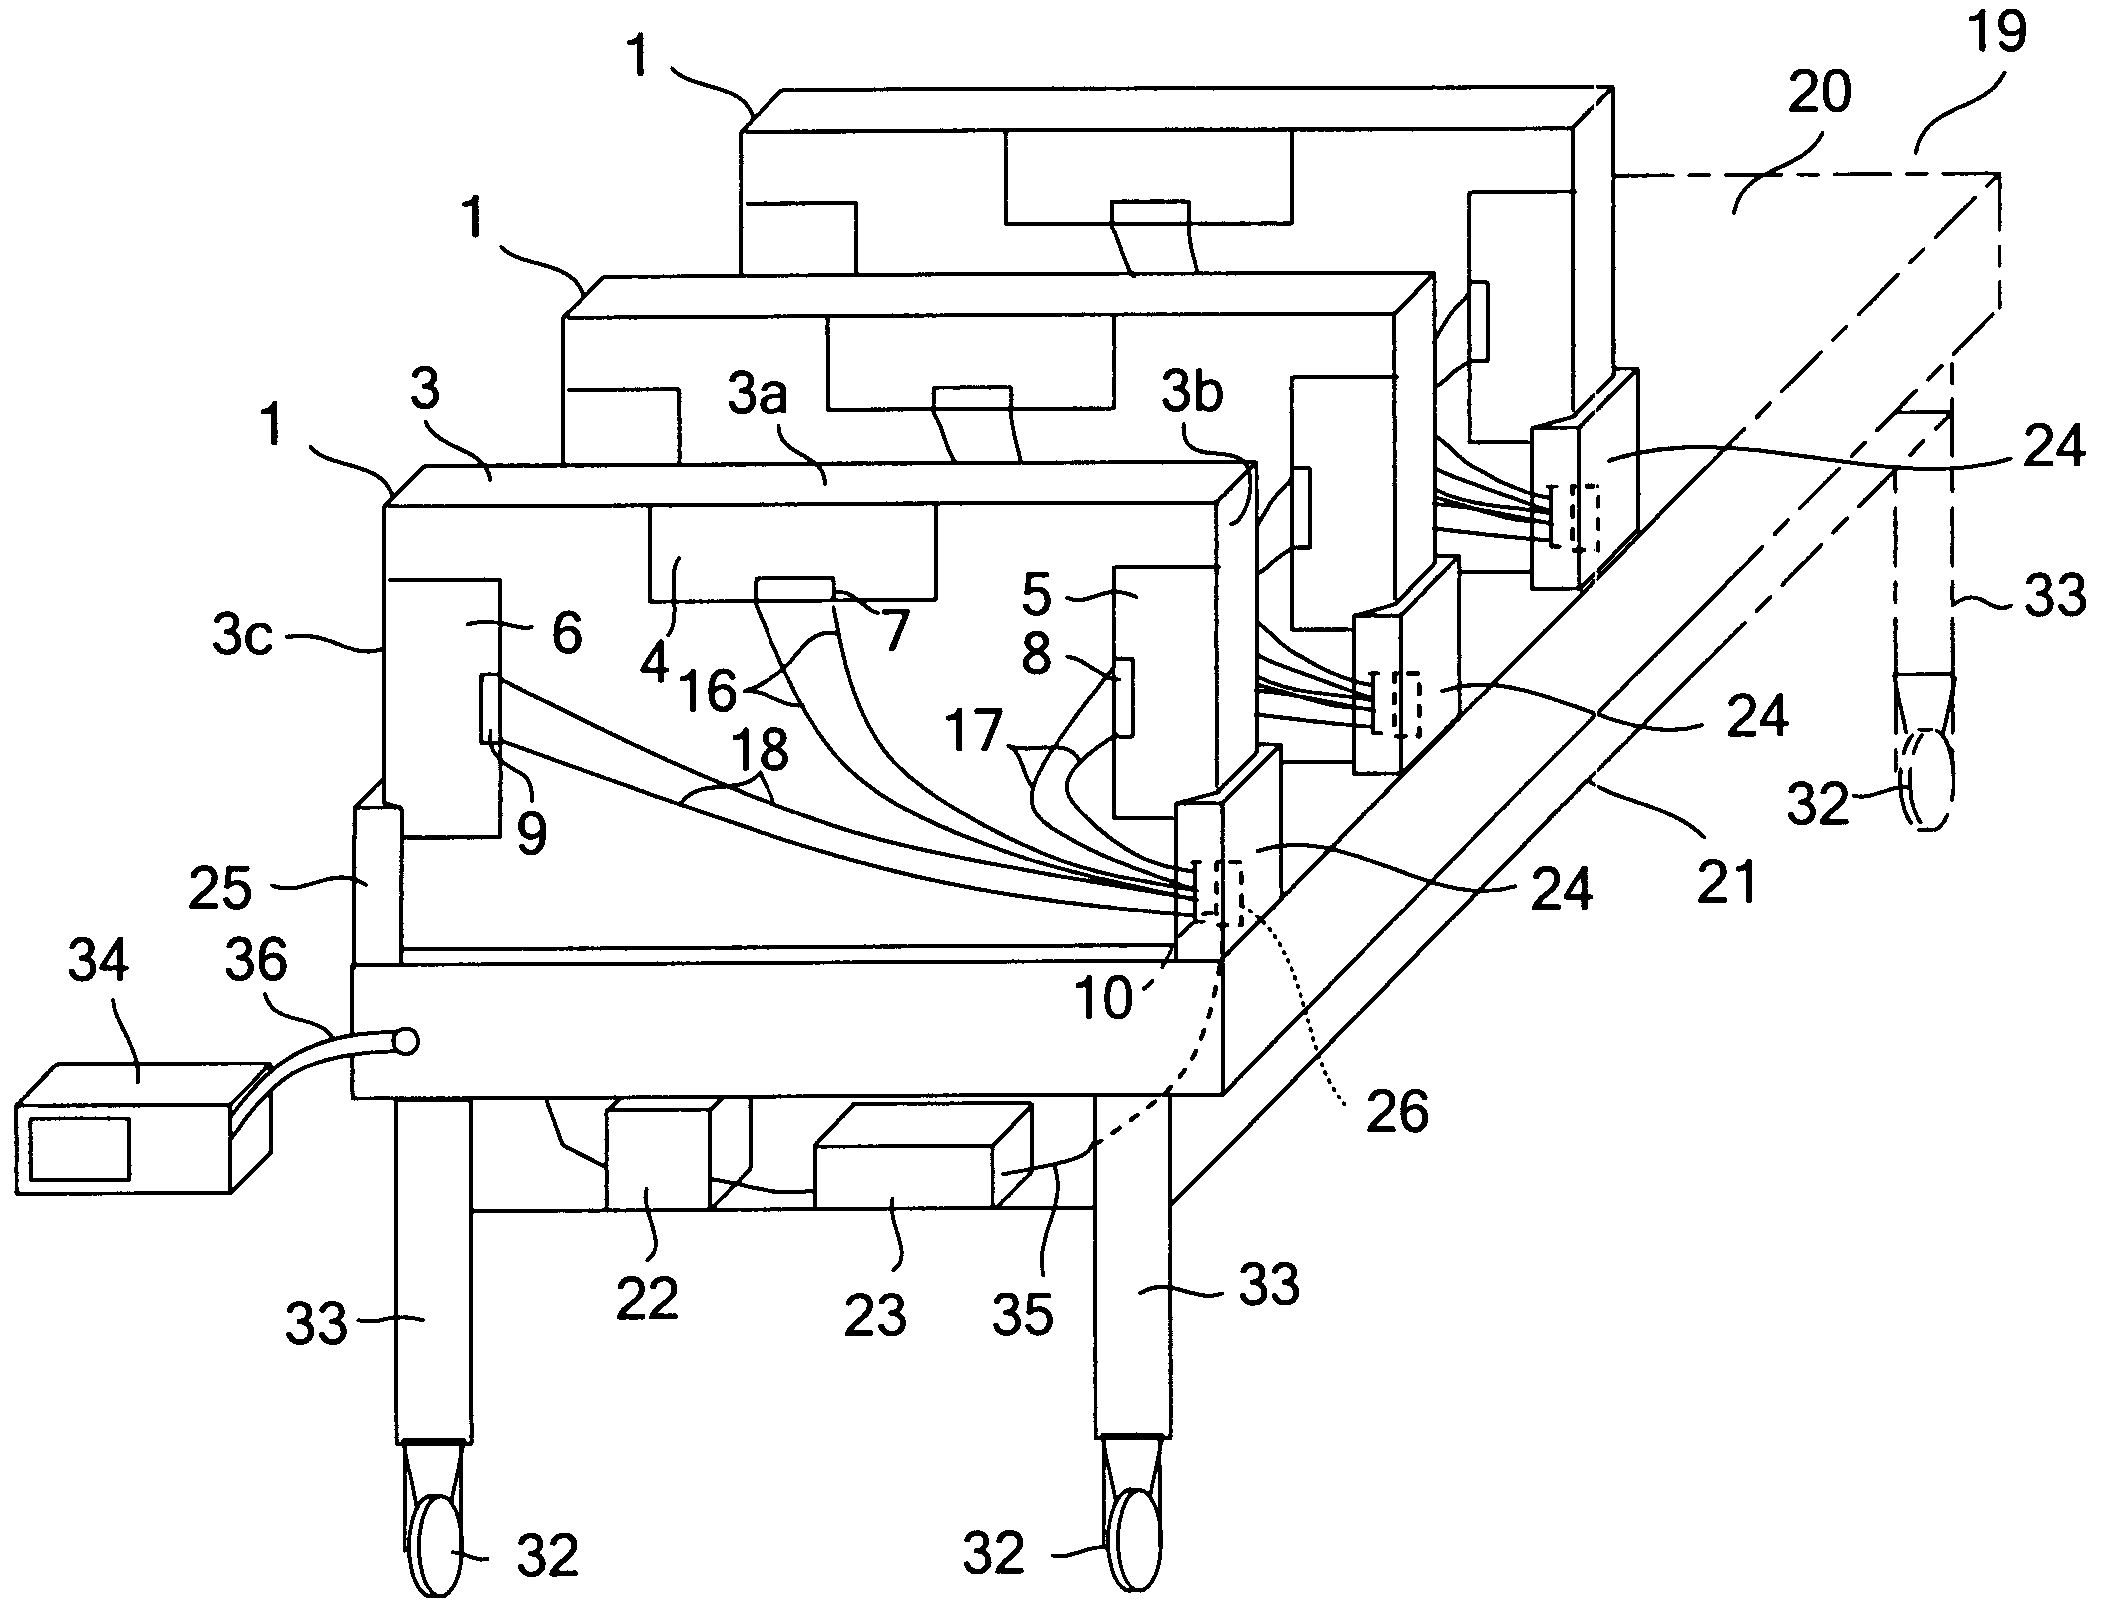 Inspection apparatus for inspecting a display module